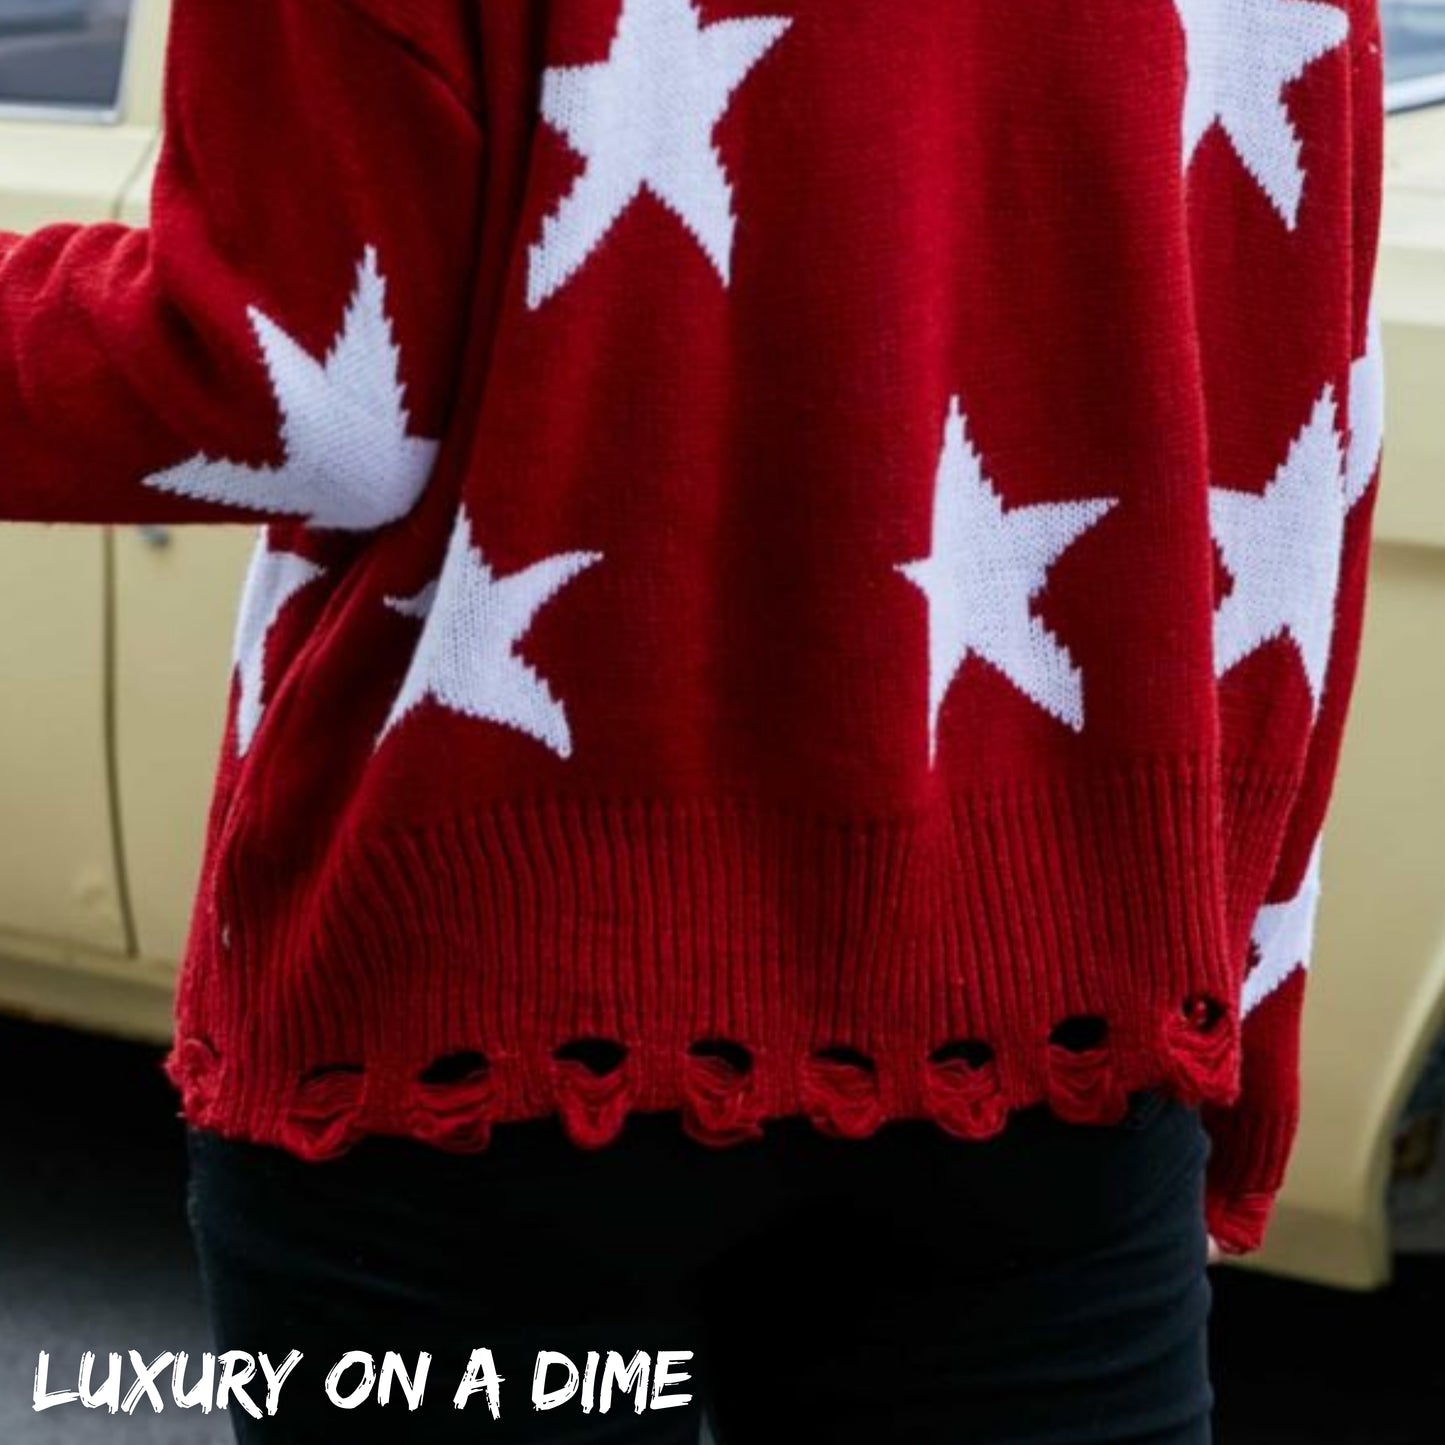 Star Print Distressed Lace Up Tie-back Knit Sweater (2 colors available)